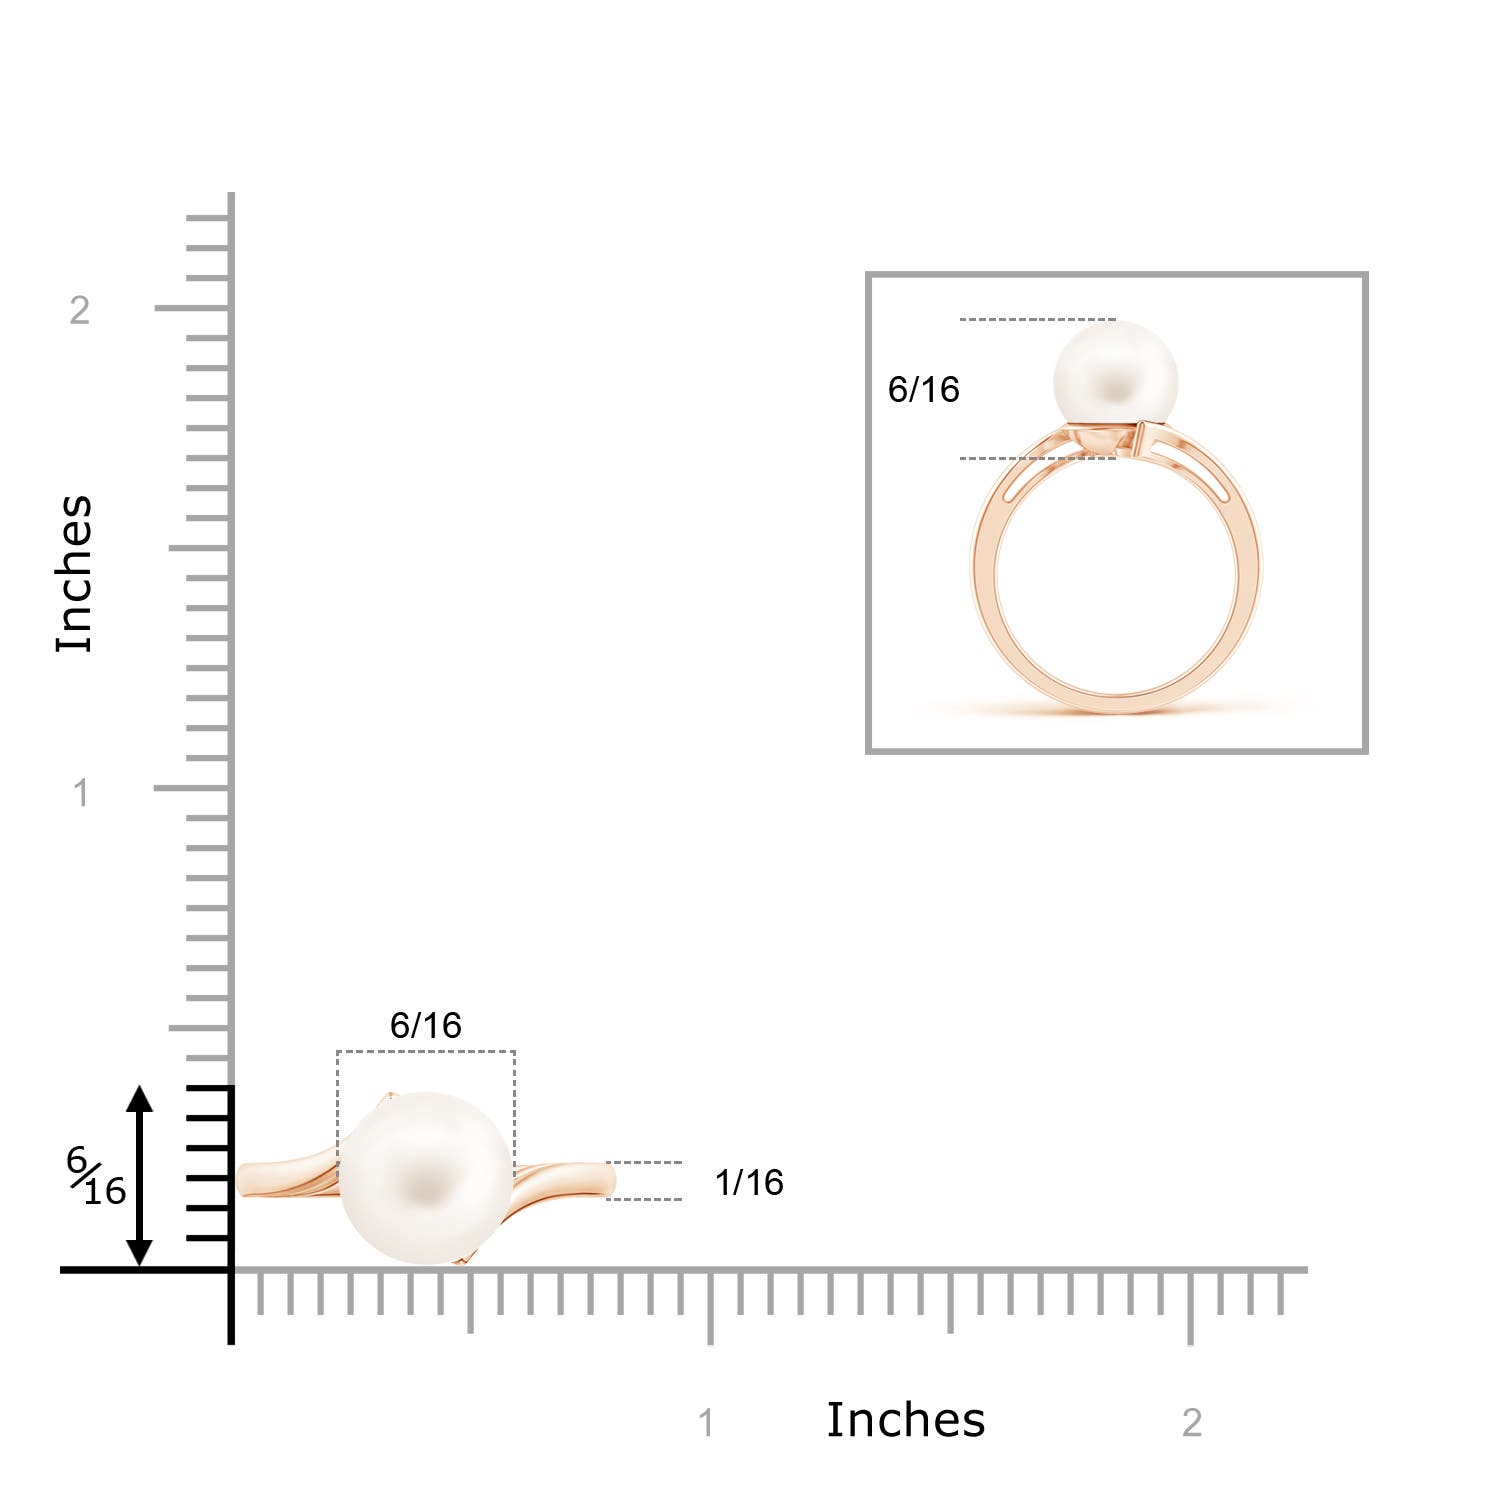 AA / 5.25 CT / 14 KT Rose Gold